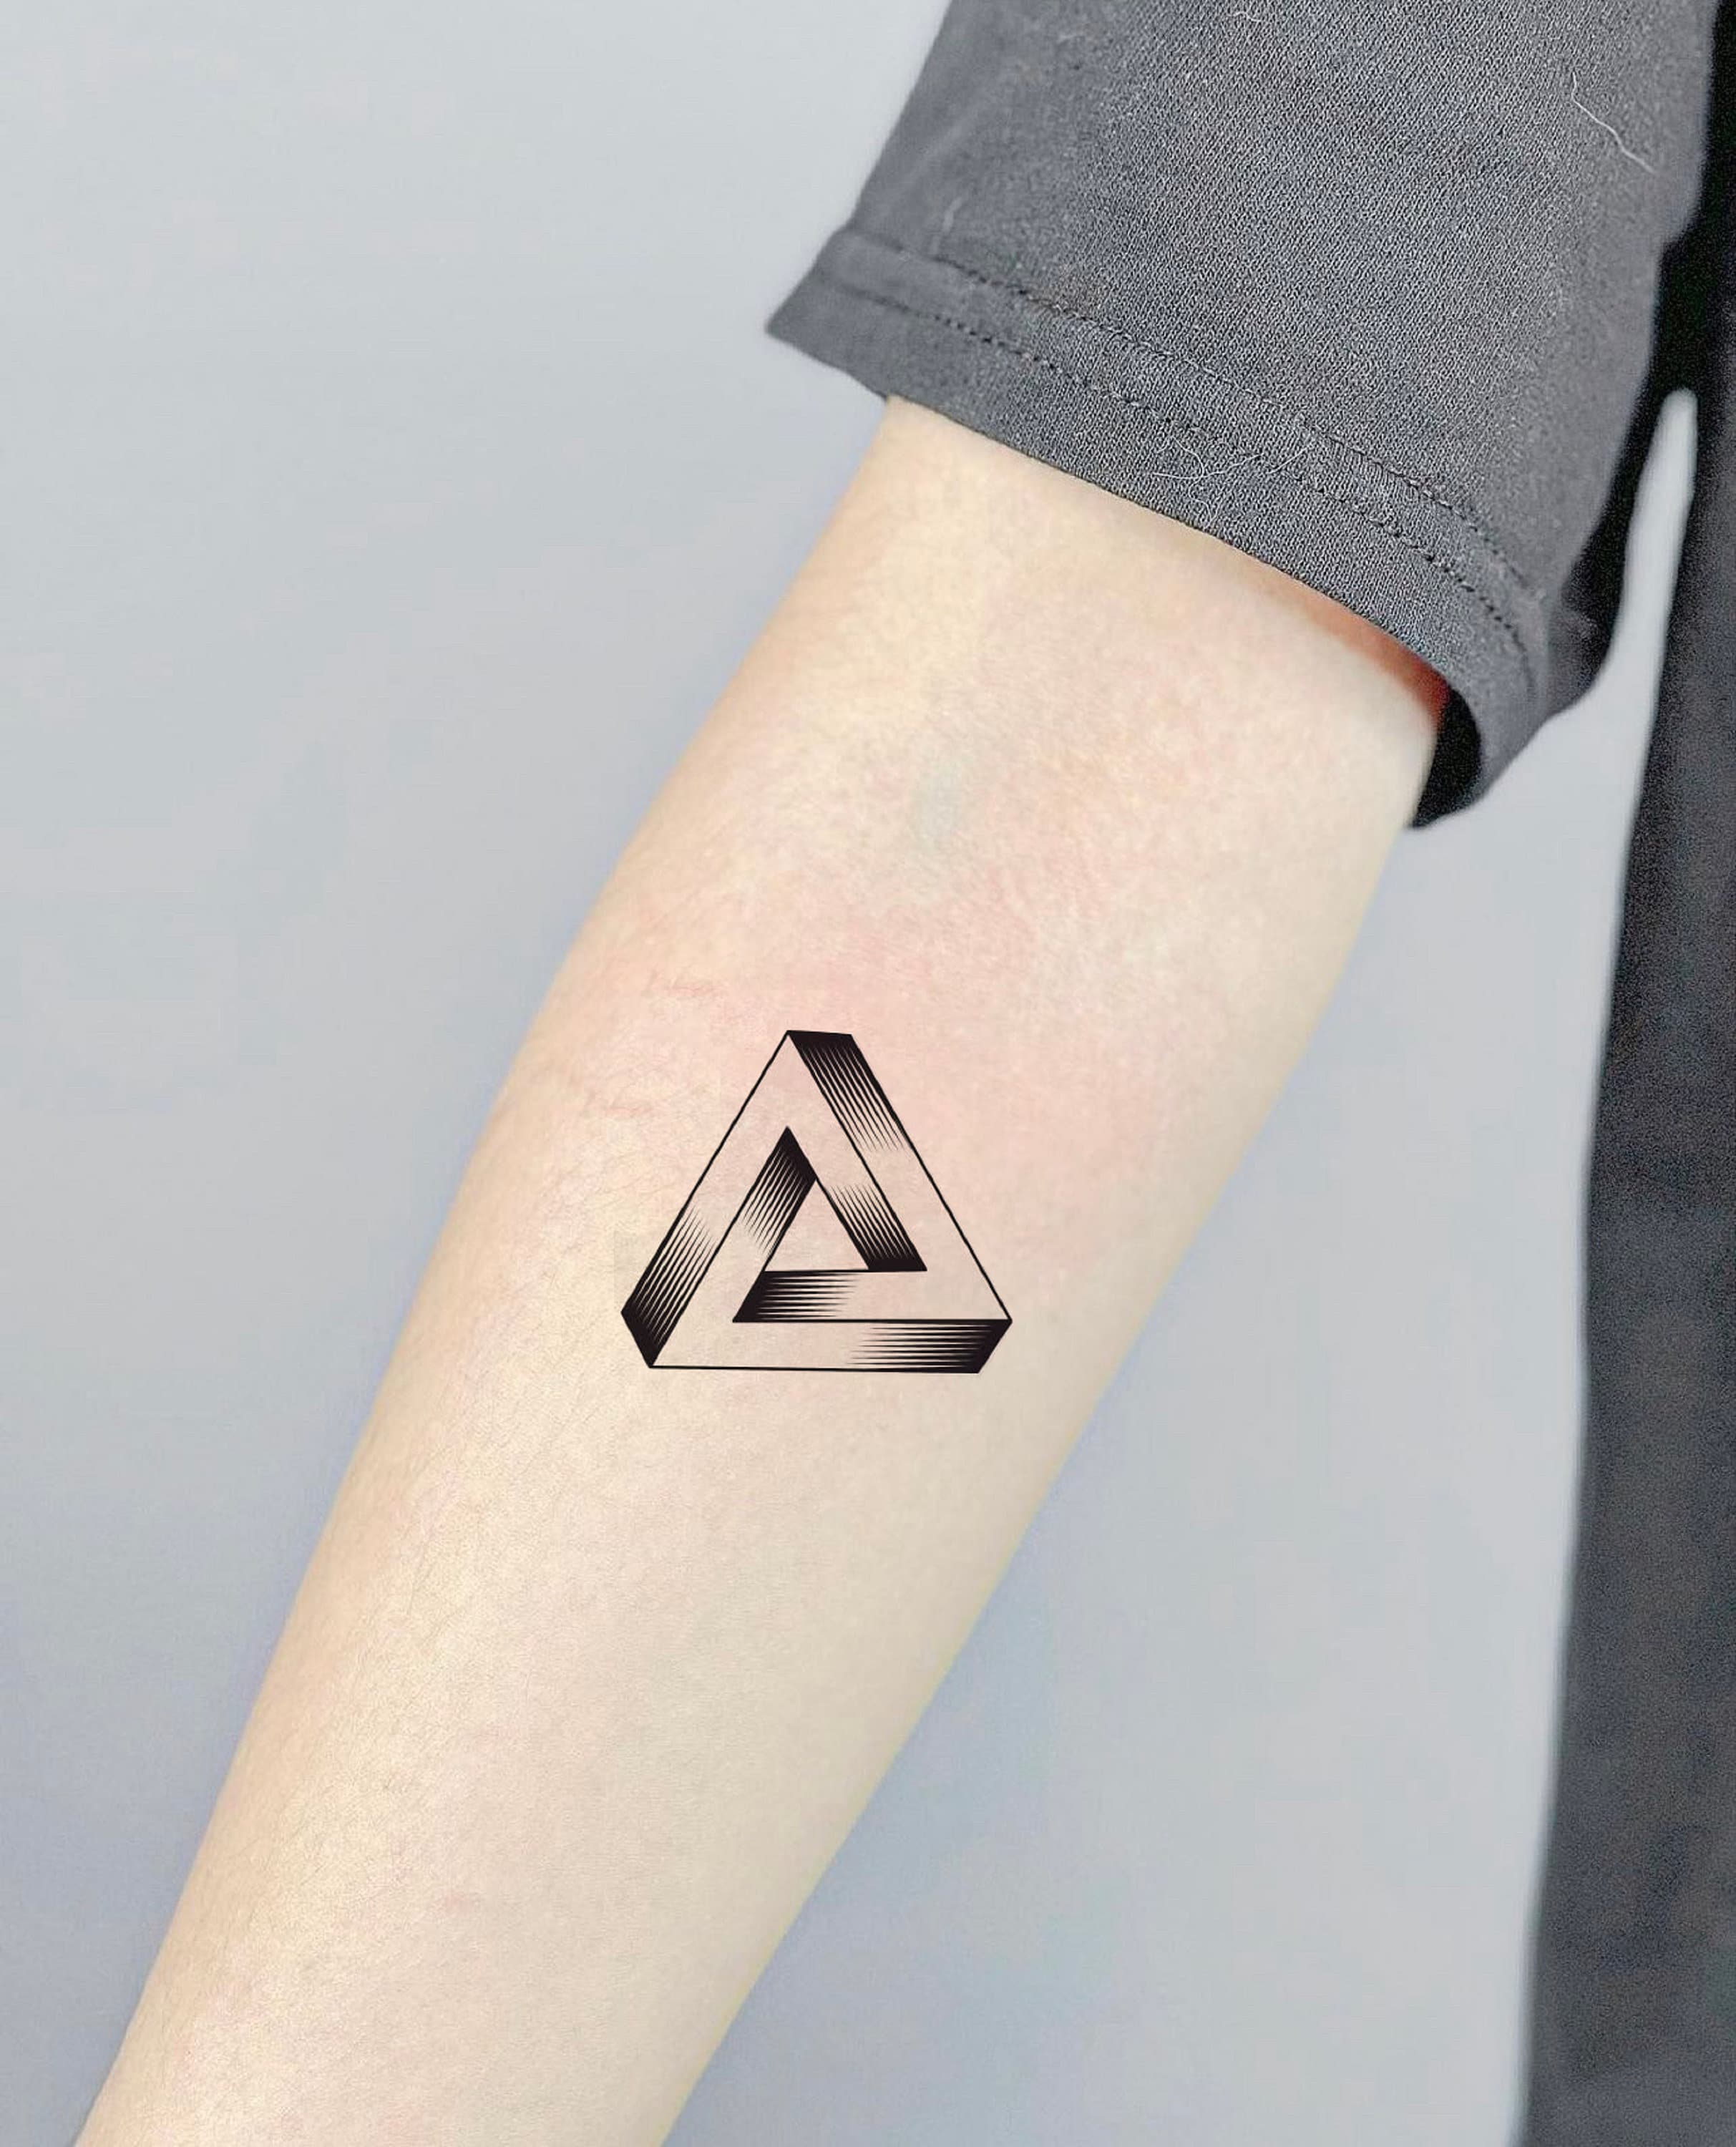 Custom Tattoos by Sarah Gaugler on Tumblr: Super Custom & Stylized Impossible  Triangle Tattoo by Sarah Gaugler - by appointment at Private Studio  www.snowtattoo.com...